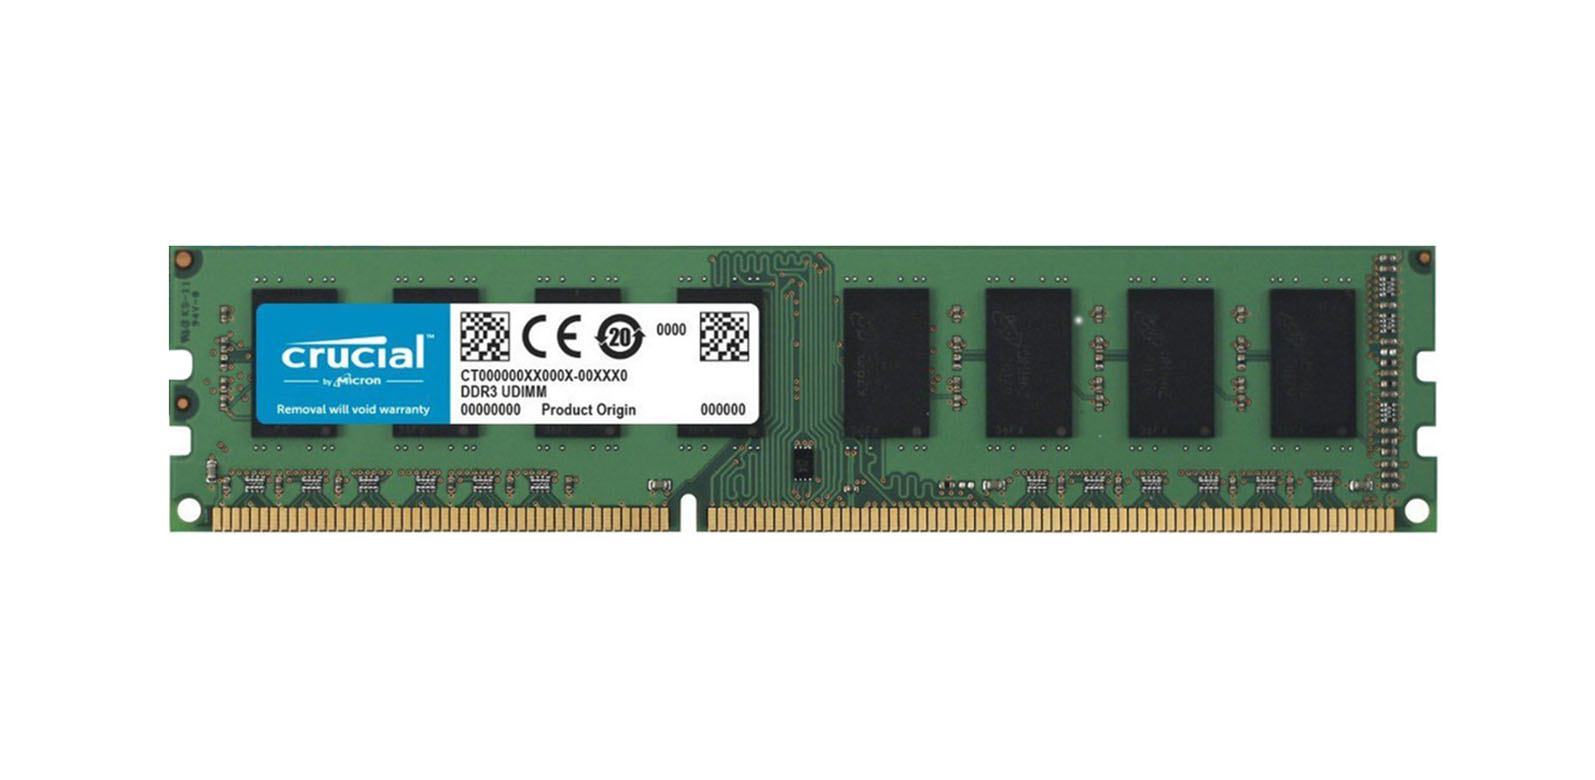 Crucial CT4220921 8GB DDR3-1600MHz PC3-12800 ECC Registered CL11 240-Pin DIMM 1.35V Low Voltage Dual Rank Very Low Profile (VLP) Memory Module upgrade for Supermicro X9DRW-7TPF+